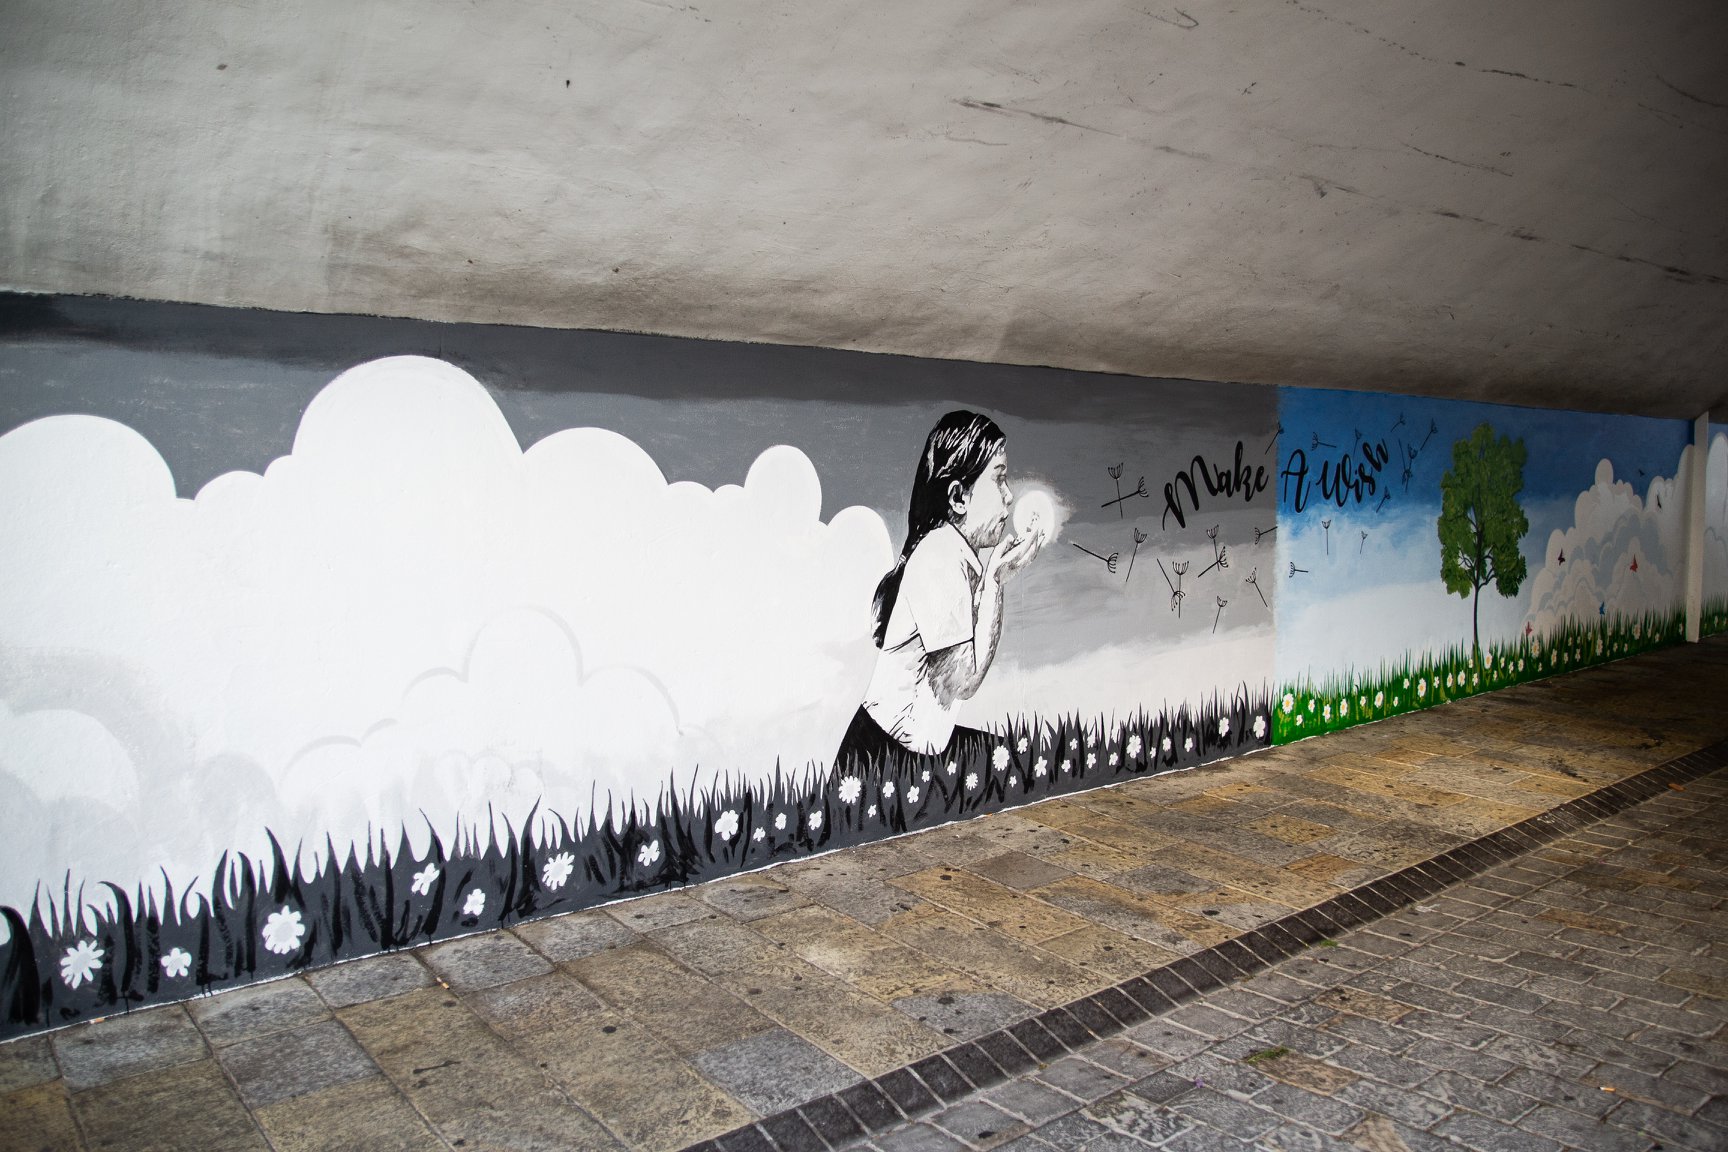 <h2>Street Art Project Gibraltar (Chatham Counterguard / Irish Town Tunnel)</h2>

In December 2017, the Gibraltar Government opened a competition to the public to come up with original street art designs. </br></br>

Aside from my graphic design career, I am also an artist. I entered the competition and was successful, being awarded the location at Chatham Counterguard tunnel by Irish Town in Gibraltar.</br></br>

In this day and age, gone are the wide open spaces of Gibraltar, and the heritage buildings struggle to compete with the monstrosities of modern contemporary architecture.</br></br>

The pollution we are exposed to is so harsh here; I feel that there should be more green spaces to help with cleaner air.</br></br>

‘Make a Wish’ invites the viewer to leave behind the hustle and bustle of modern life and walk into nature’s paradise. Part of the murals are black and white representing pollution and then you walk into a kaleidoscope of colour. The child (in a style not dissimilar to Banksy) transforms the mural into colour, but at the same time, invites the passer-by to make a wish. So often we see people engrossed in their mobile phones as they walk that they forget the beauty around them.
